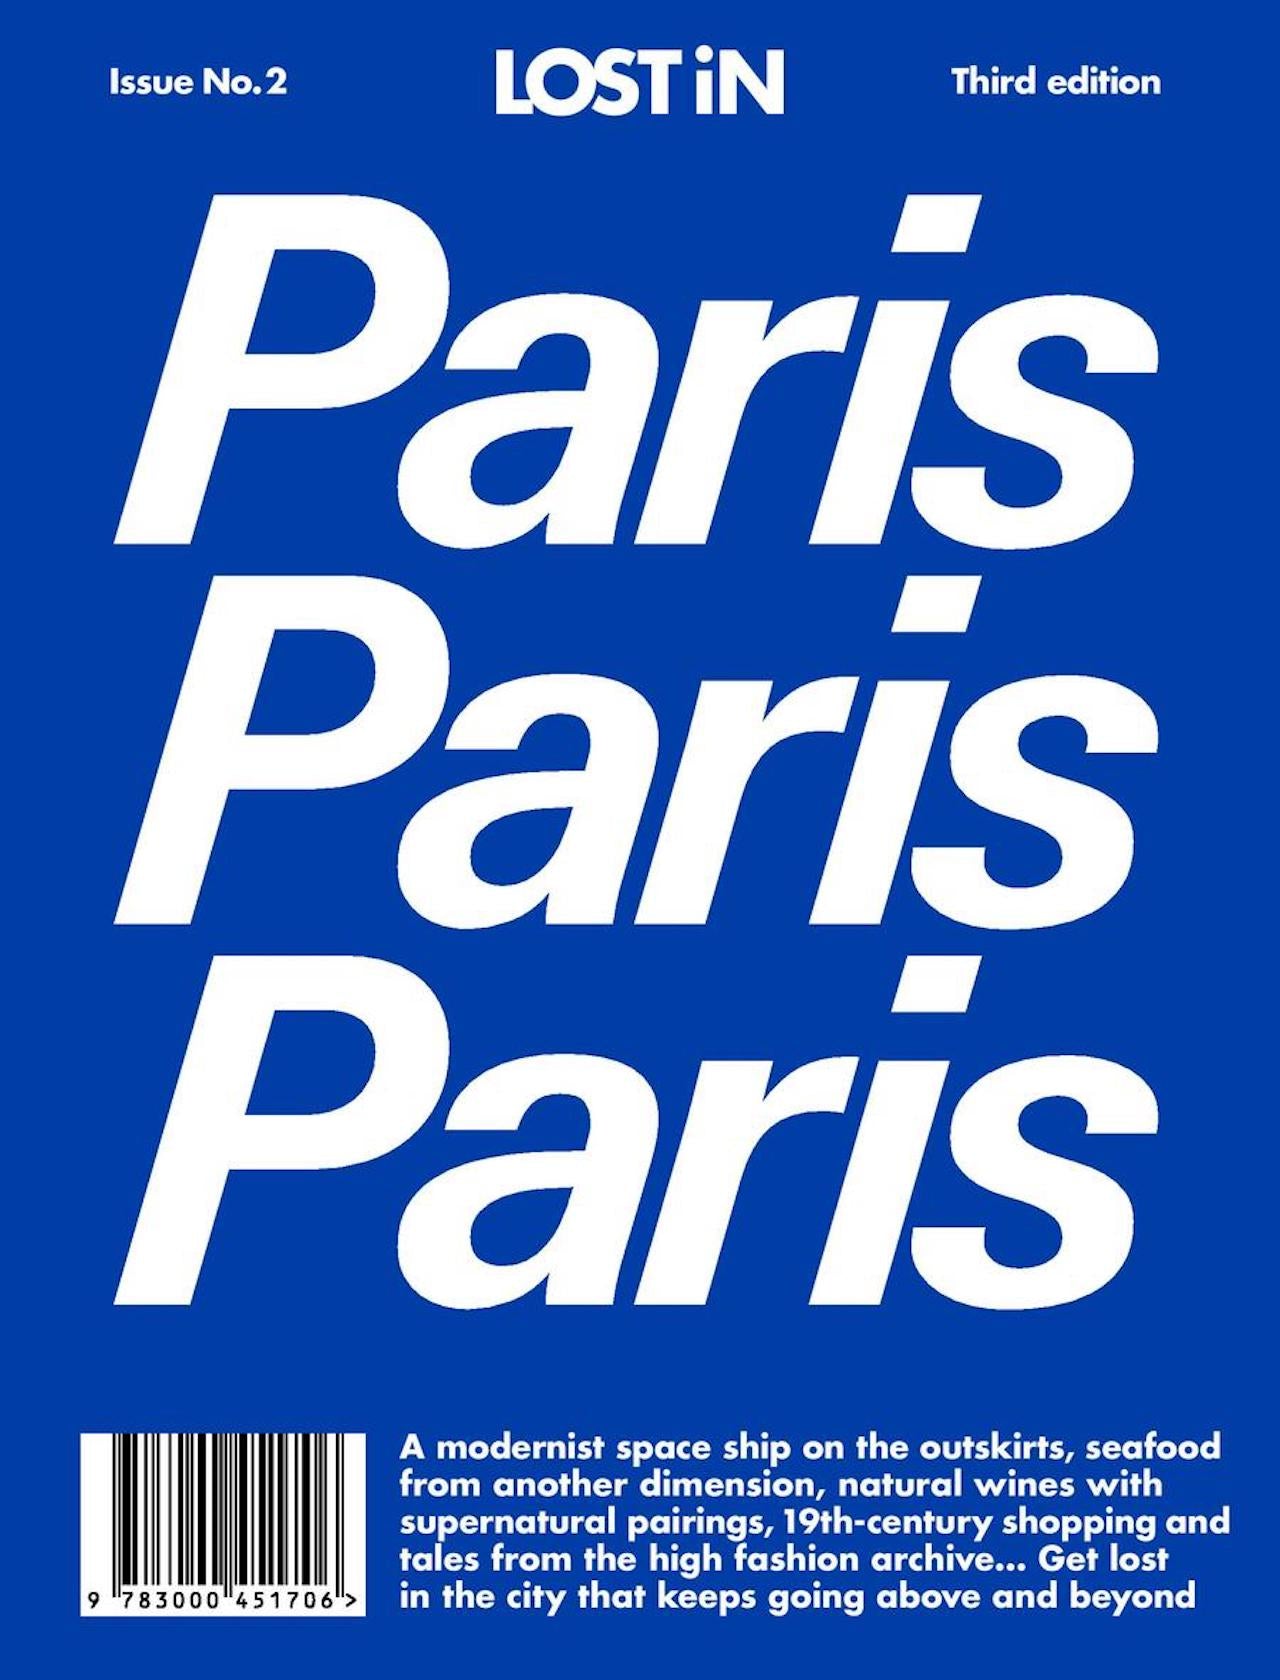 Lost in Paris THIRD EDITION no ISBN change cover